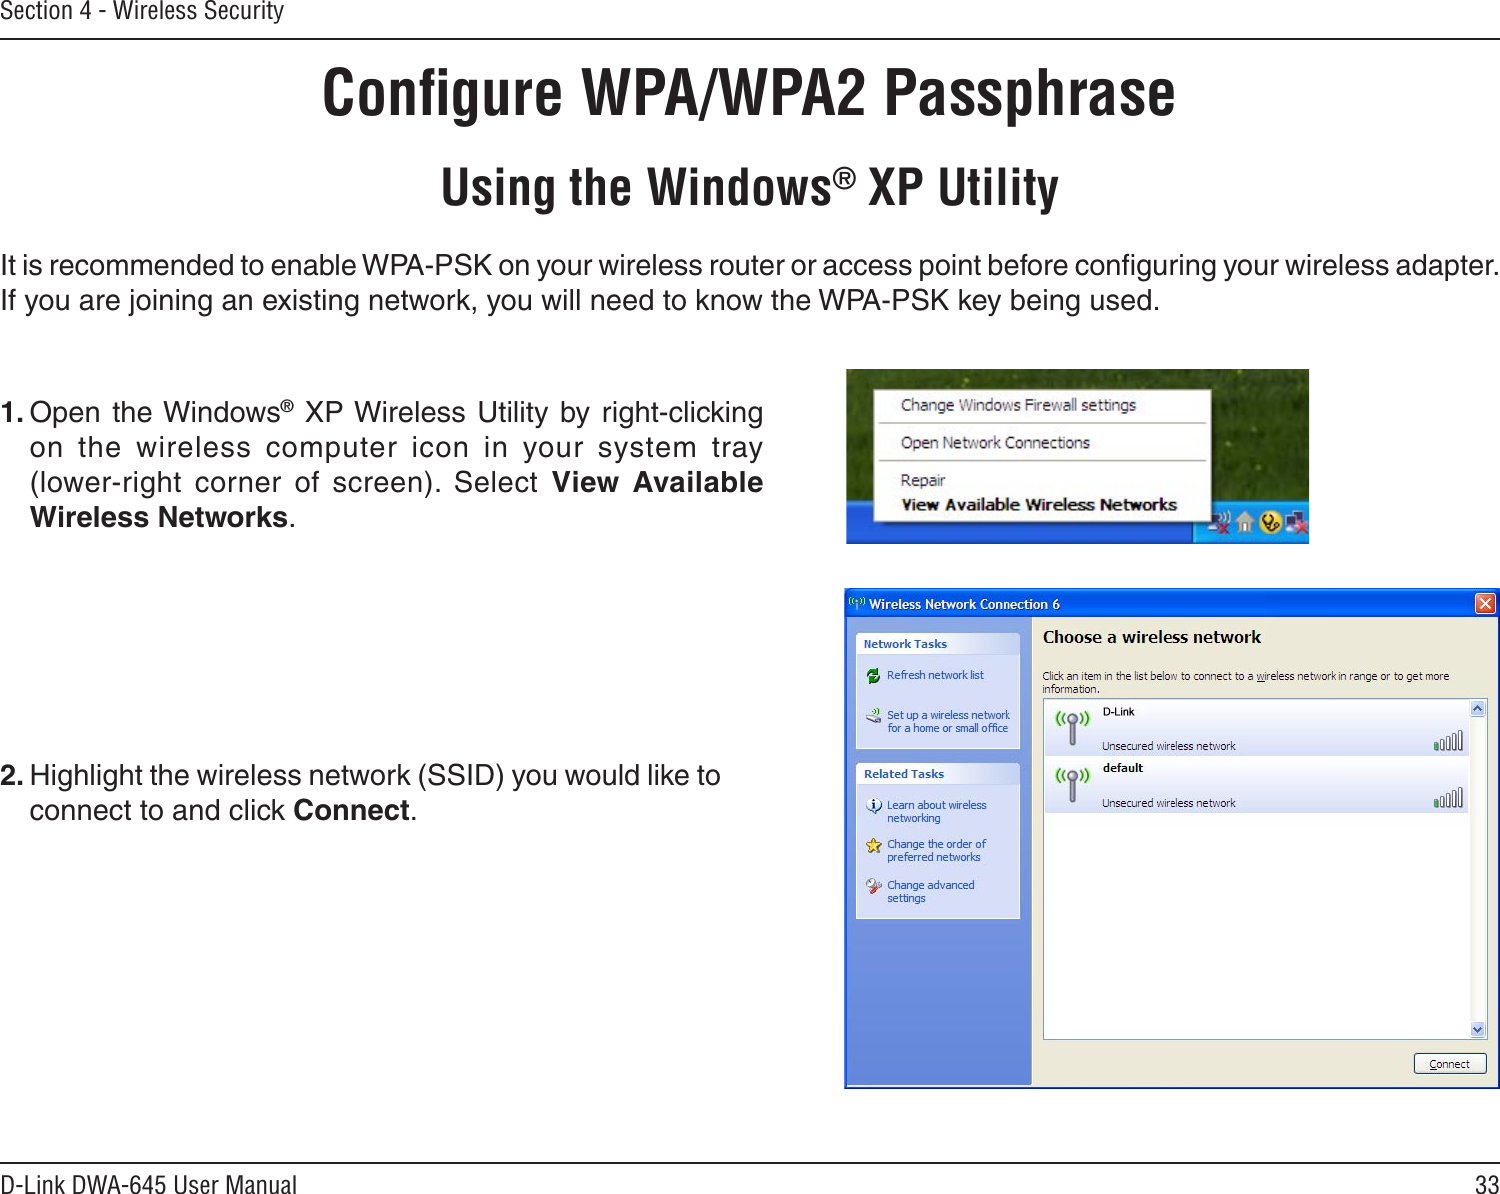 33D-Link DWA-645 User ManualSection 4 - Wireless SecurityConﬁgure WPA/WPA2 PassphraseUsing the Windows® XP UtilityIt is recommended to enable WPA-PSK on your wireless router or access point before conﬁguring your wireless adapter. If you are joining an existing network, you will need to know the WPA-PSK key being used.2. Highlight the wireless network (SSID) you would like to connect to and click Connect.1. Open the Windows®  XP Wireless Utility by right-clicking on  the  wireless  computer  icon  in  your  system  tray  (lower-right  corner  of  screen).  Select  View  Available Wireless Networks. 